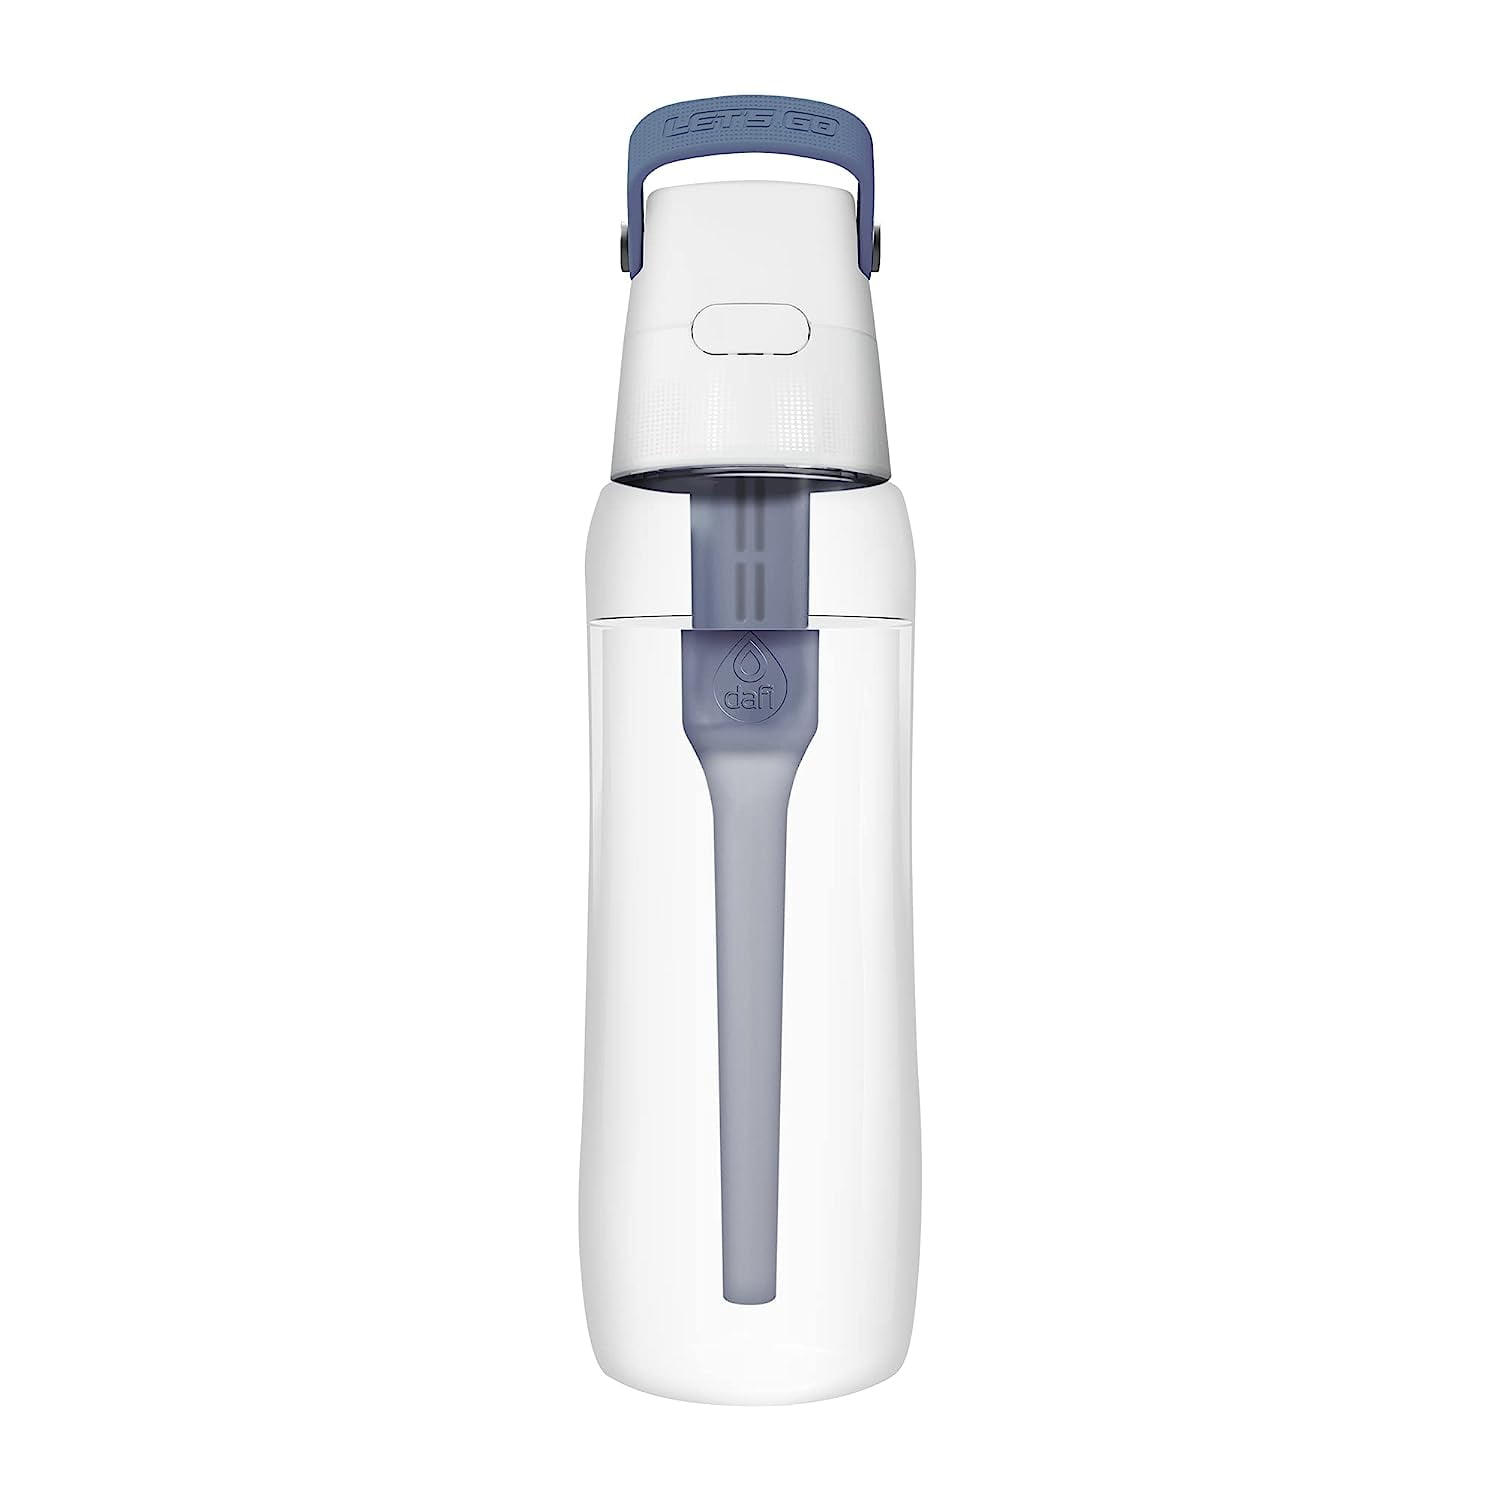  Online Auctions - Save Huge - Ship or Pick Up - Contigo  Cortland Chill 2.0 24oz Stainless Steel Water Bottle, Lavender $41